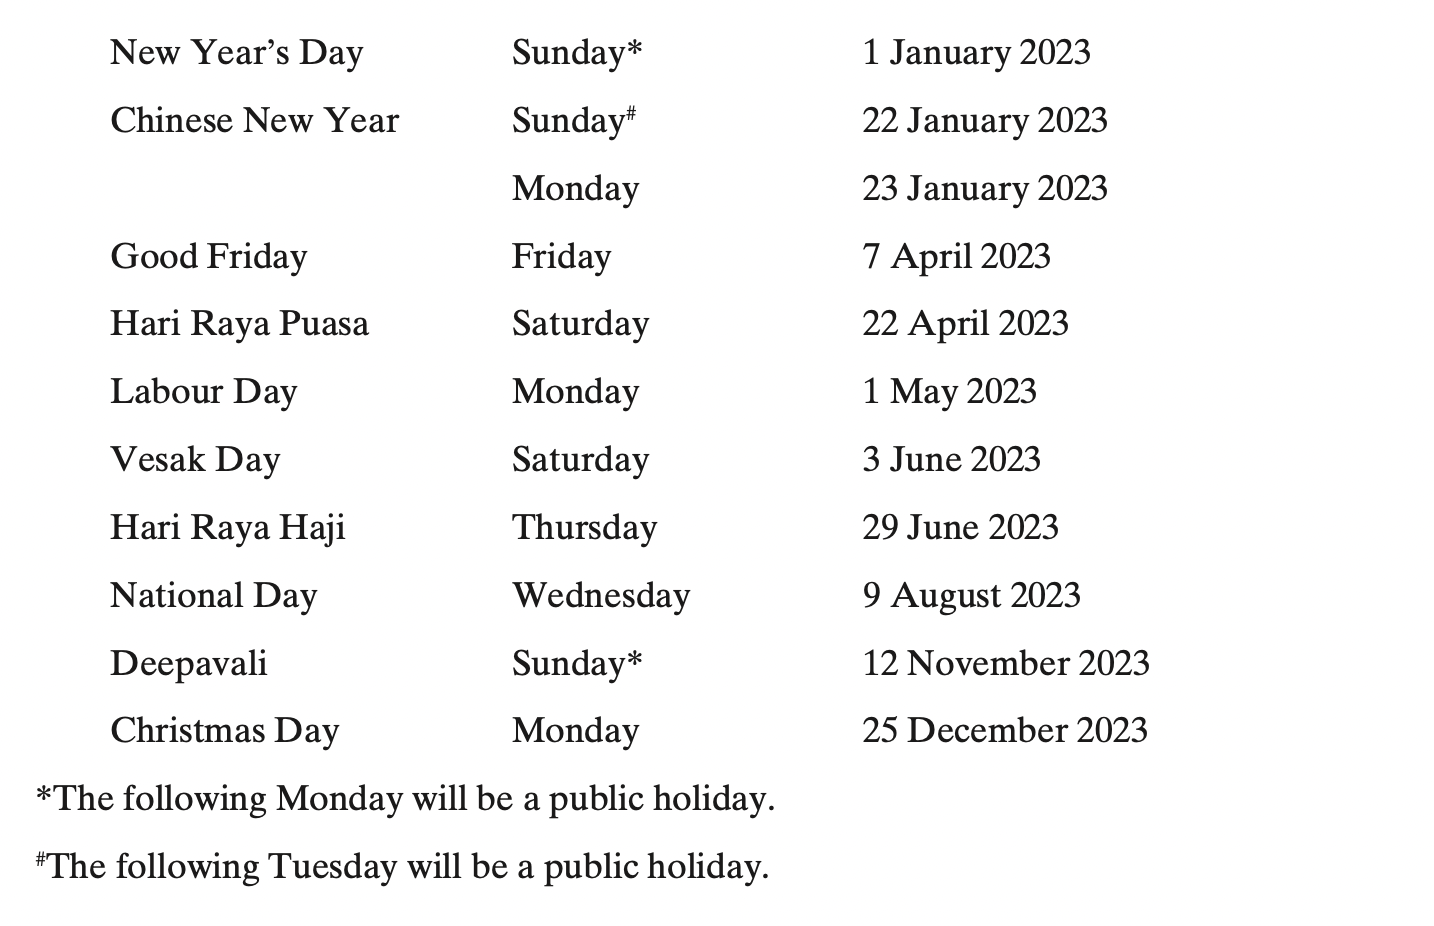 Up To 7 Public Holiday Long Weekends In Spore In 2023 Citigist 9910